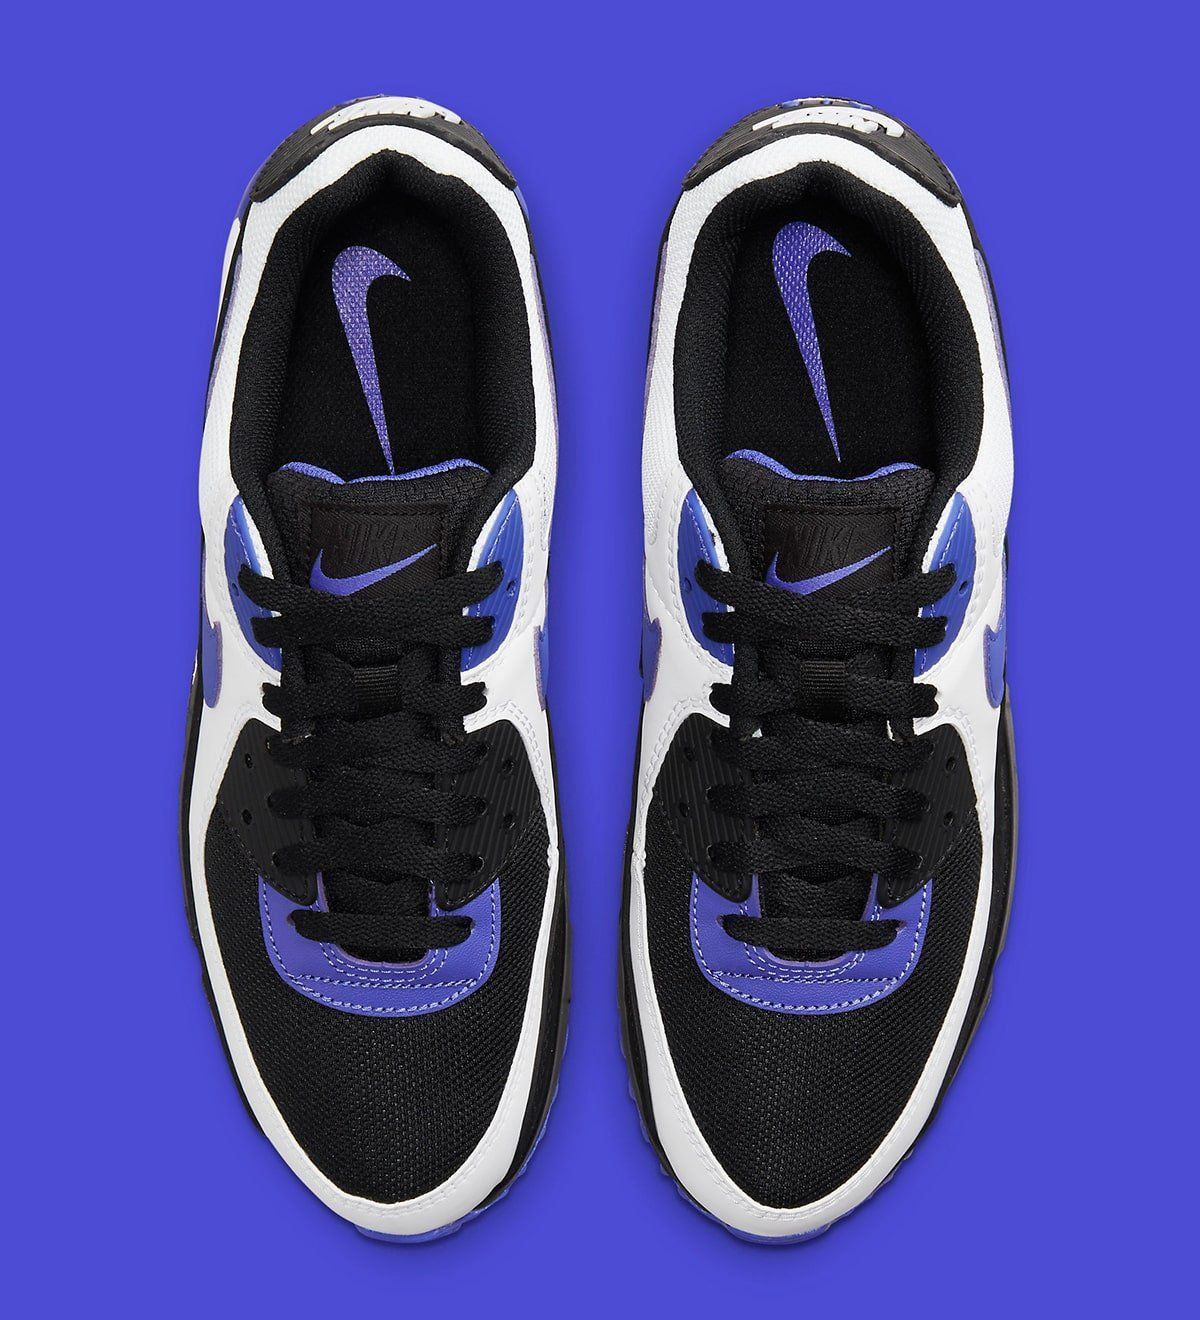 Hub remark Belong Available Now // Nike Air Max 90 "Persian Violet" | HOUSE OF HEAT